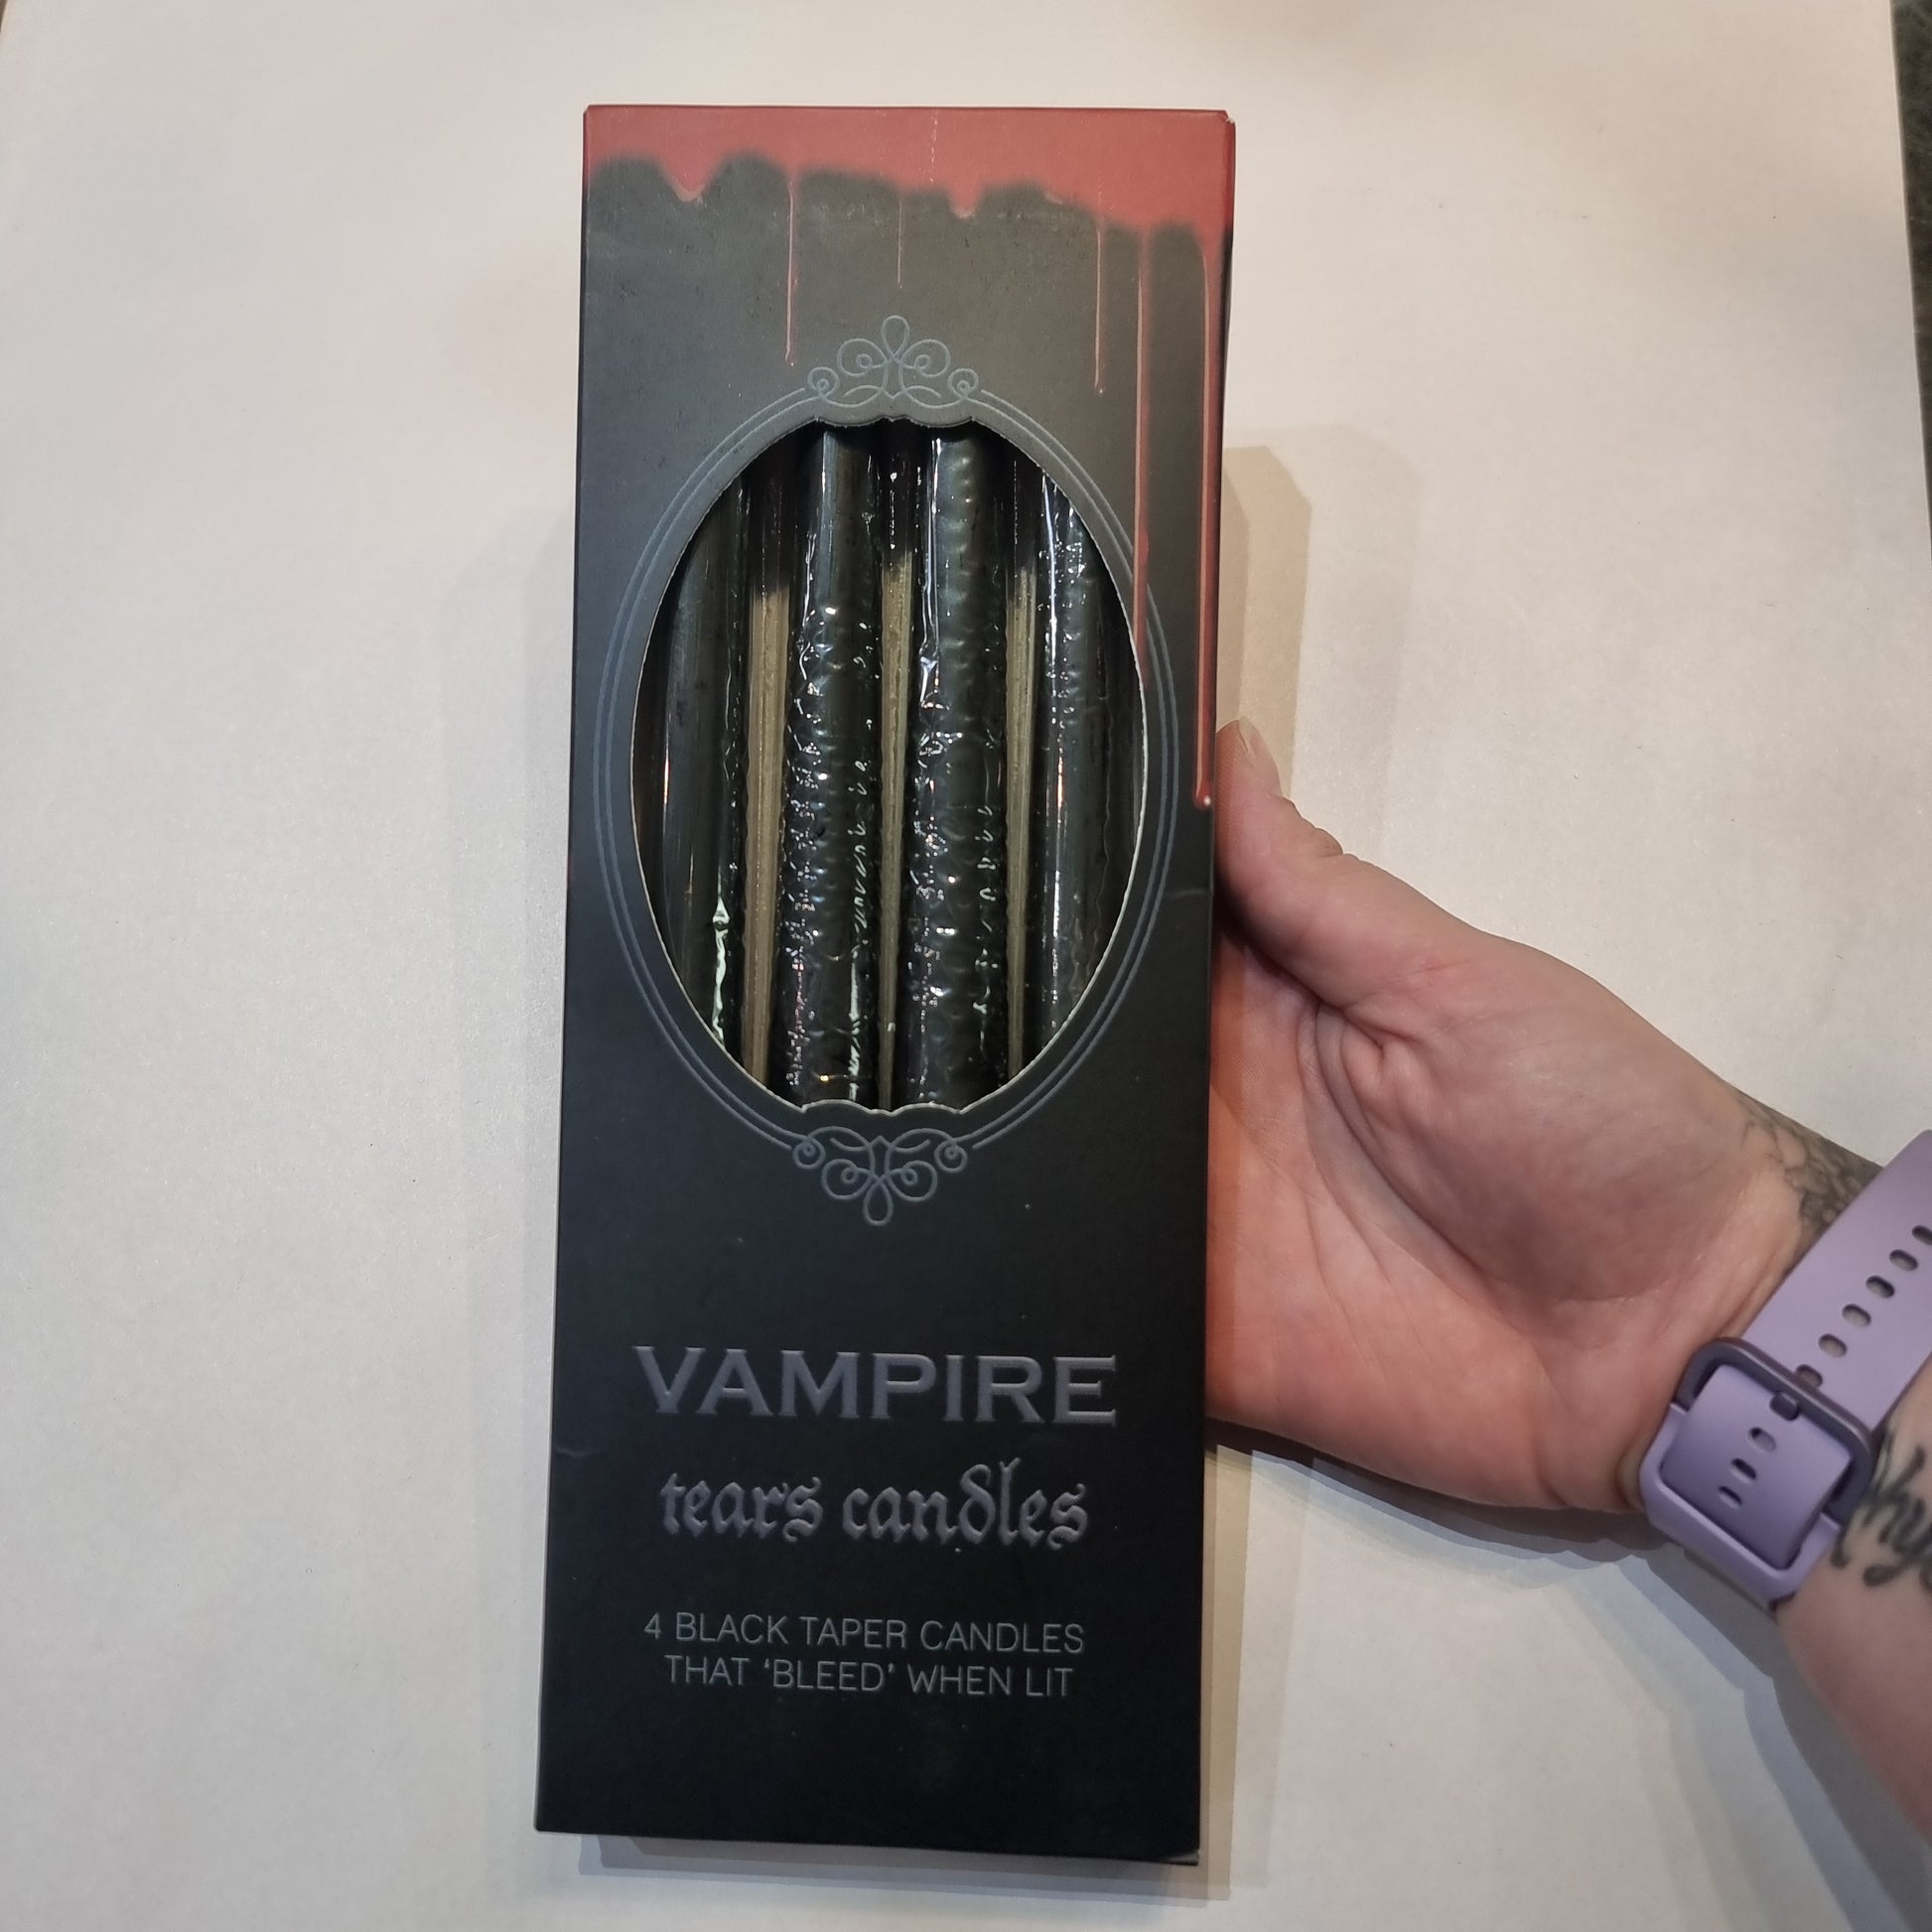 Vampire tears candles - Rivendell Shop